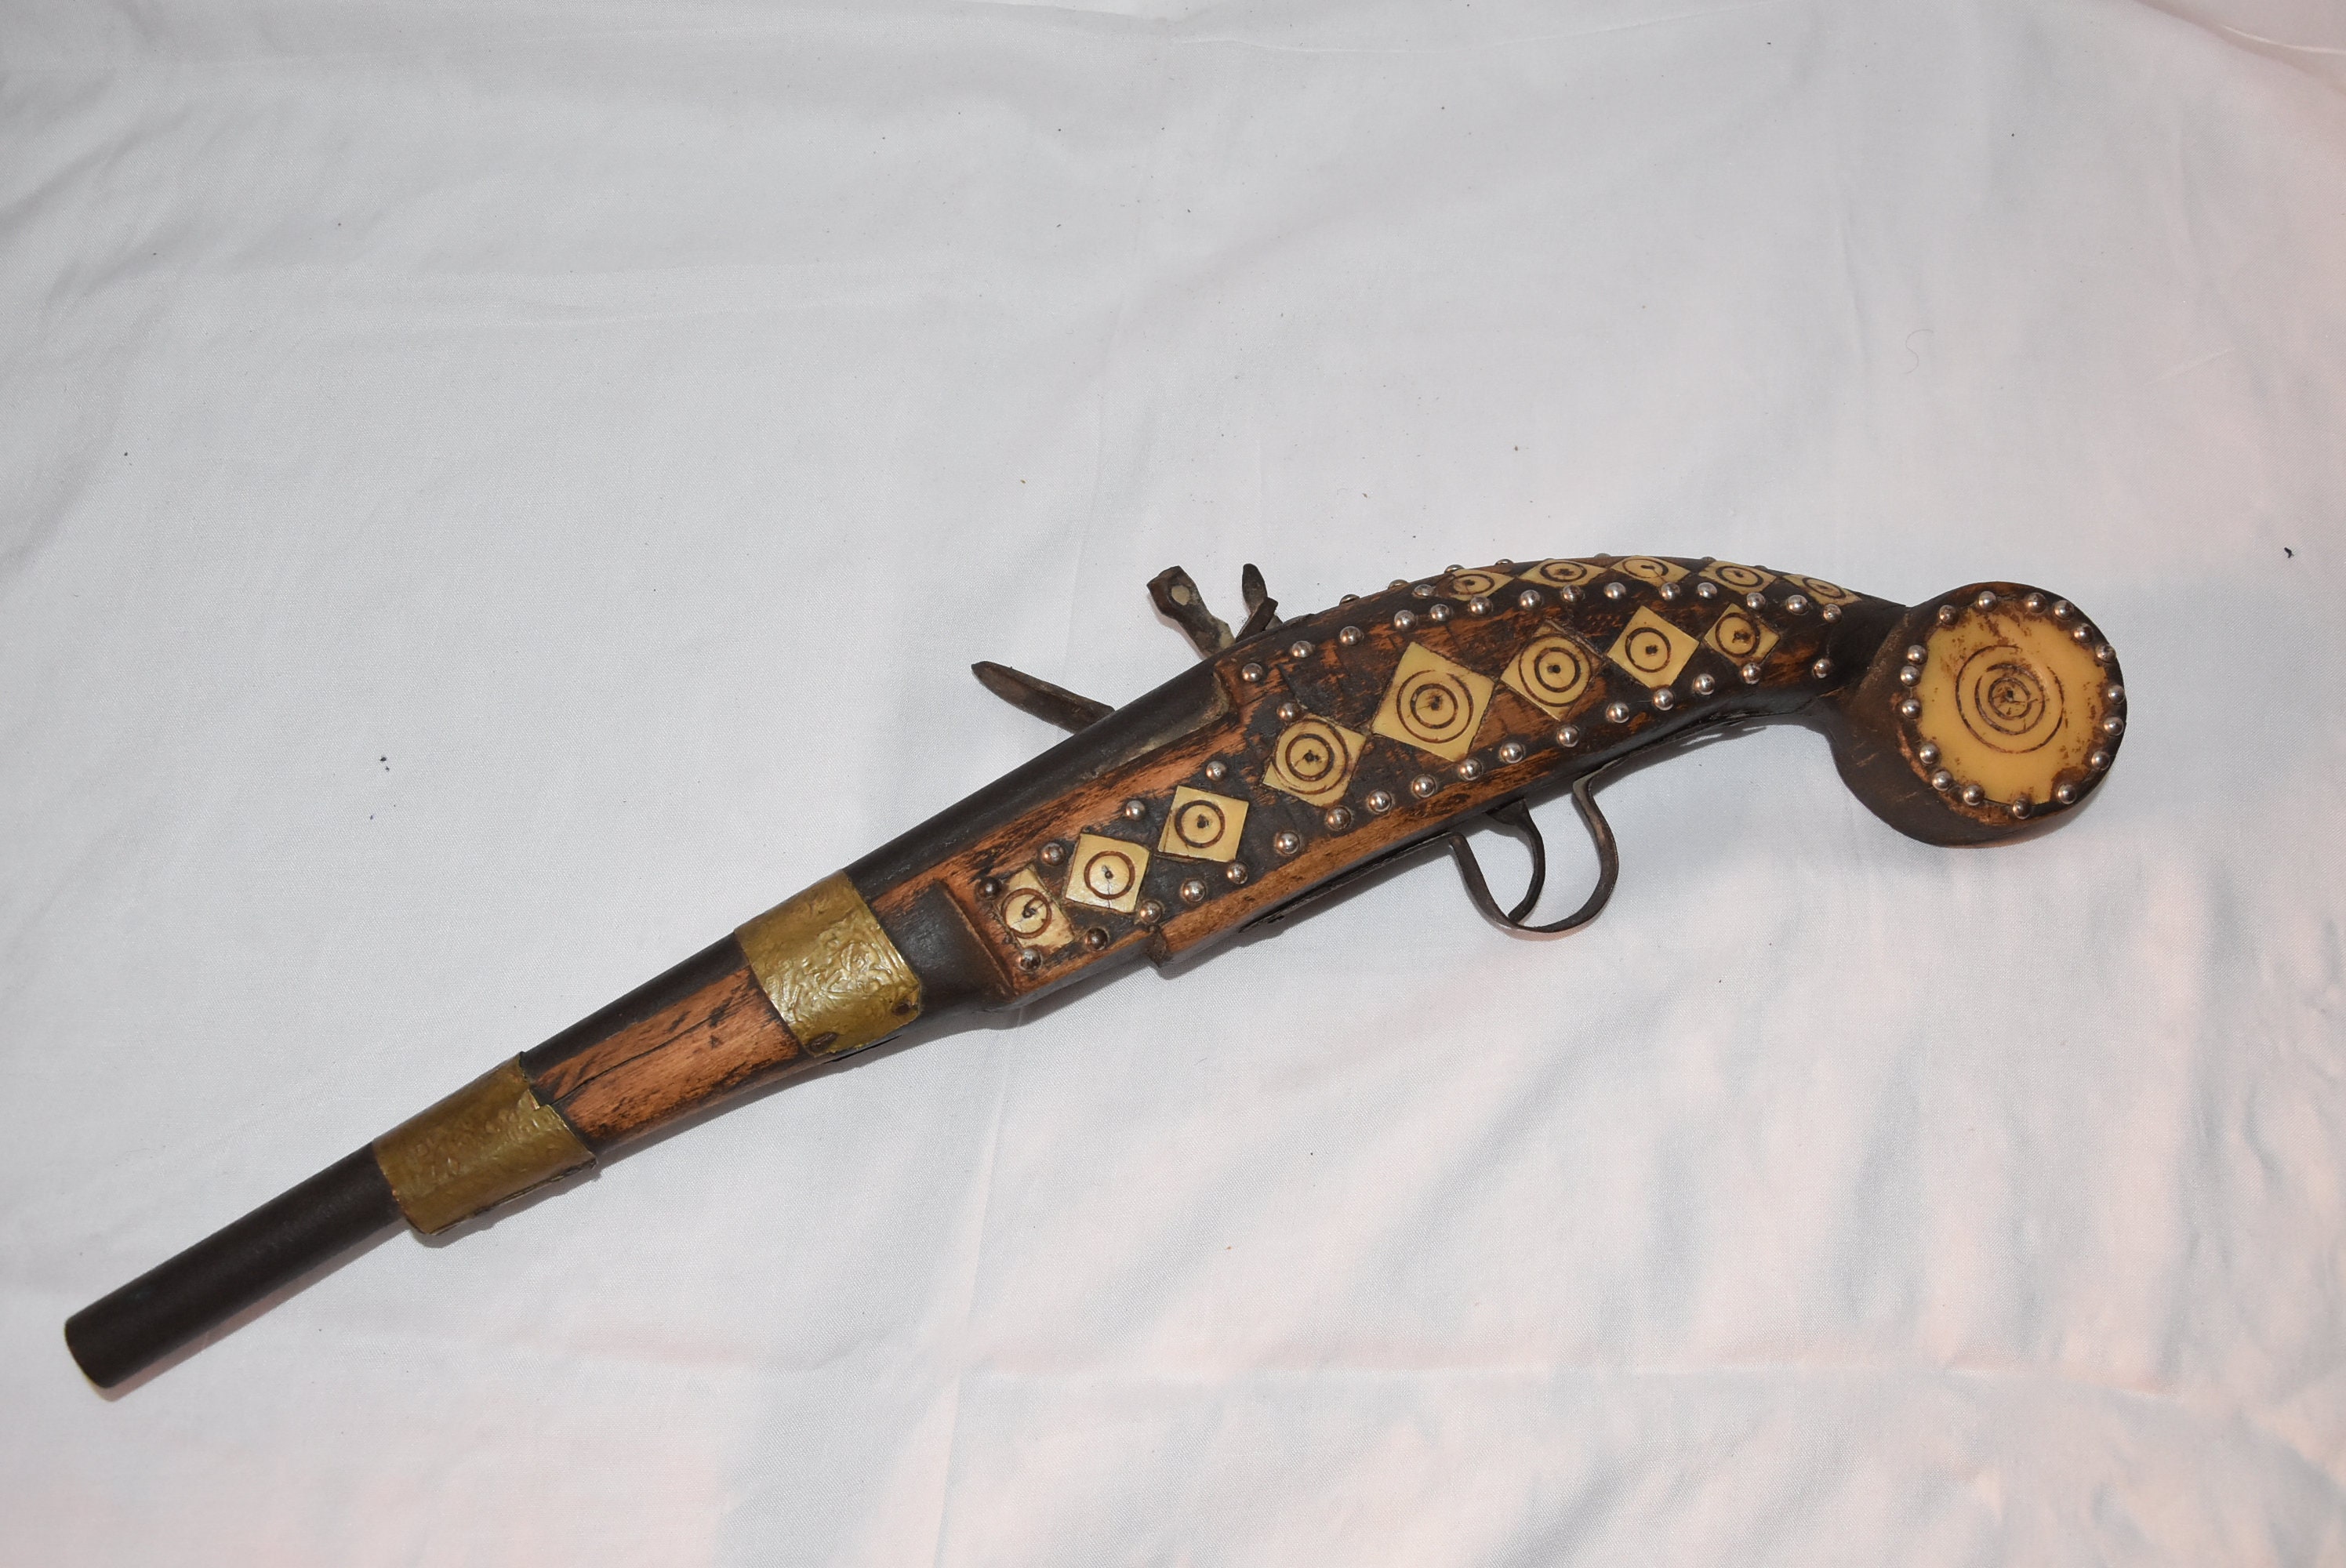 Details about   MOROCCAN ARABIC TRADITIONAL RIFLE/MOUKAHLA TBOURIDA GUN 